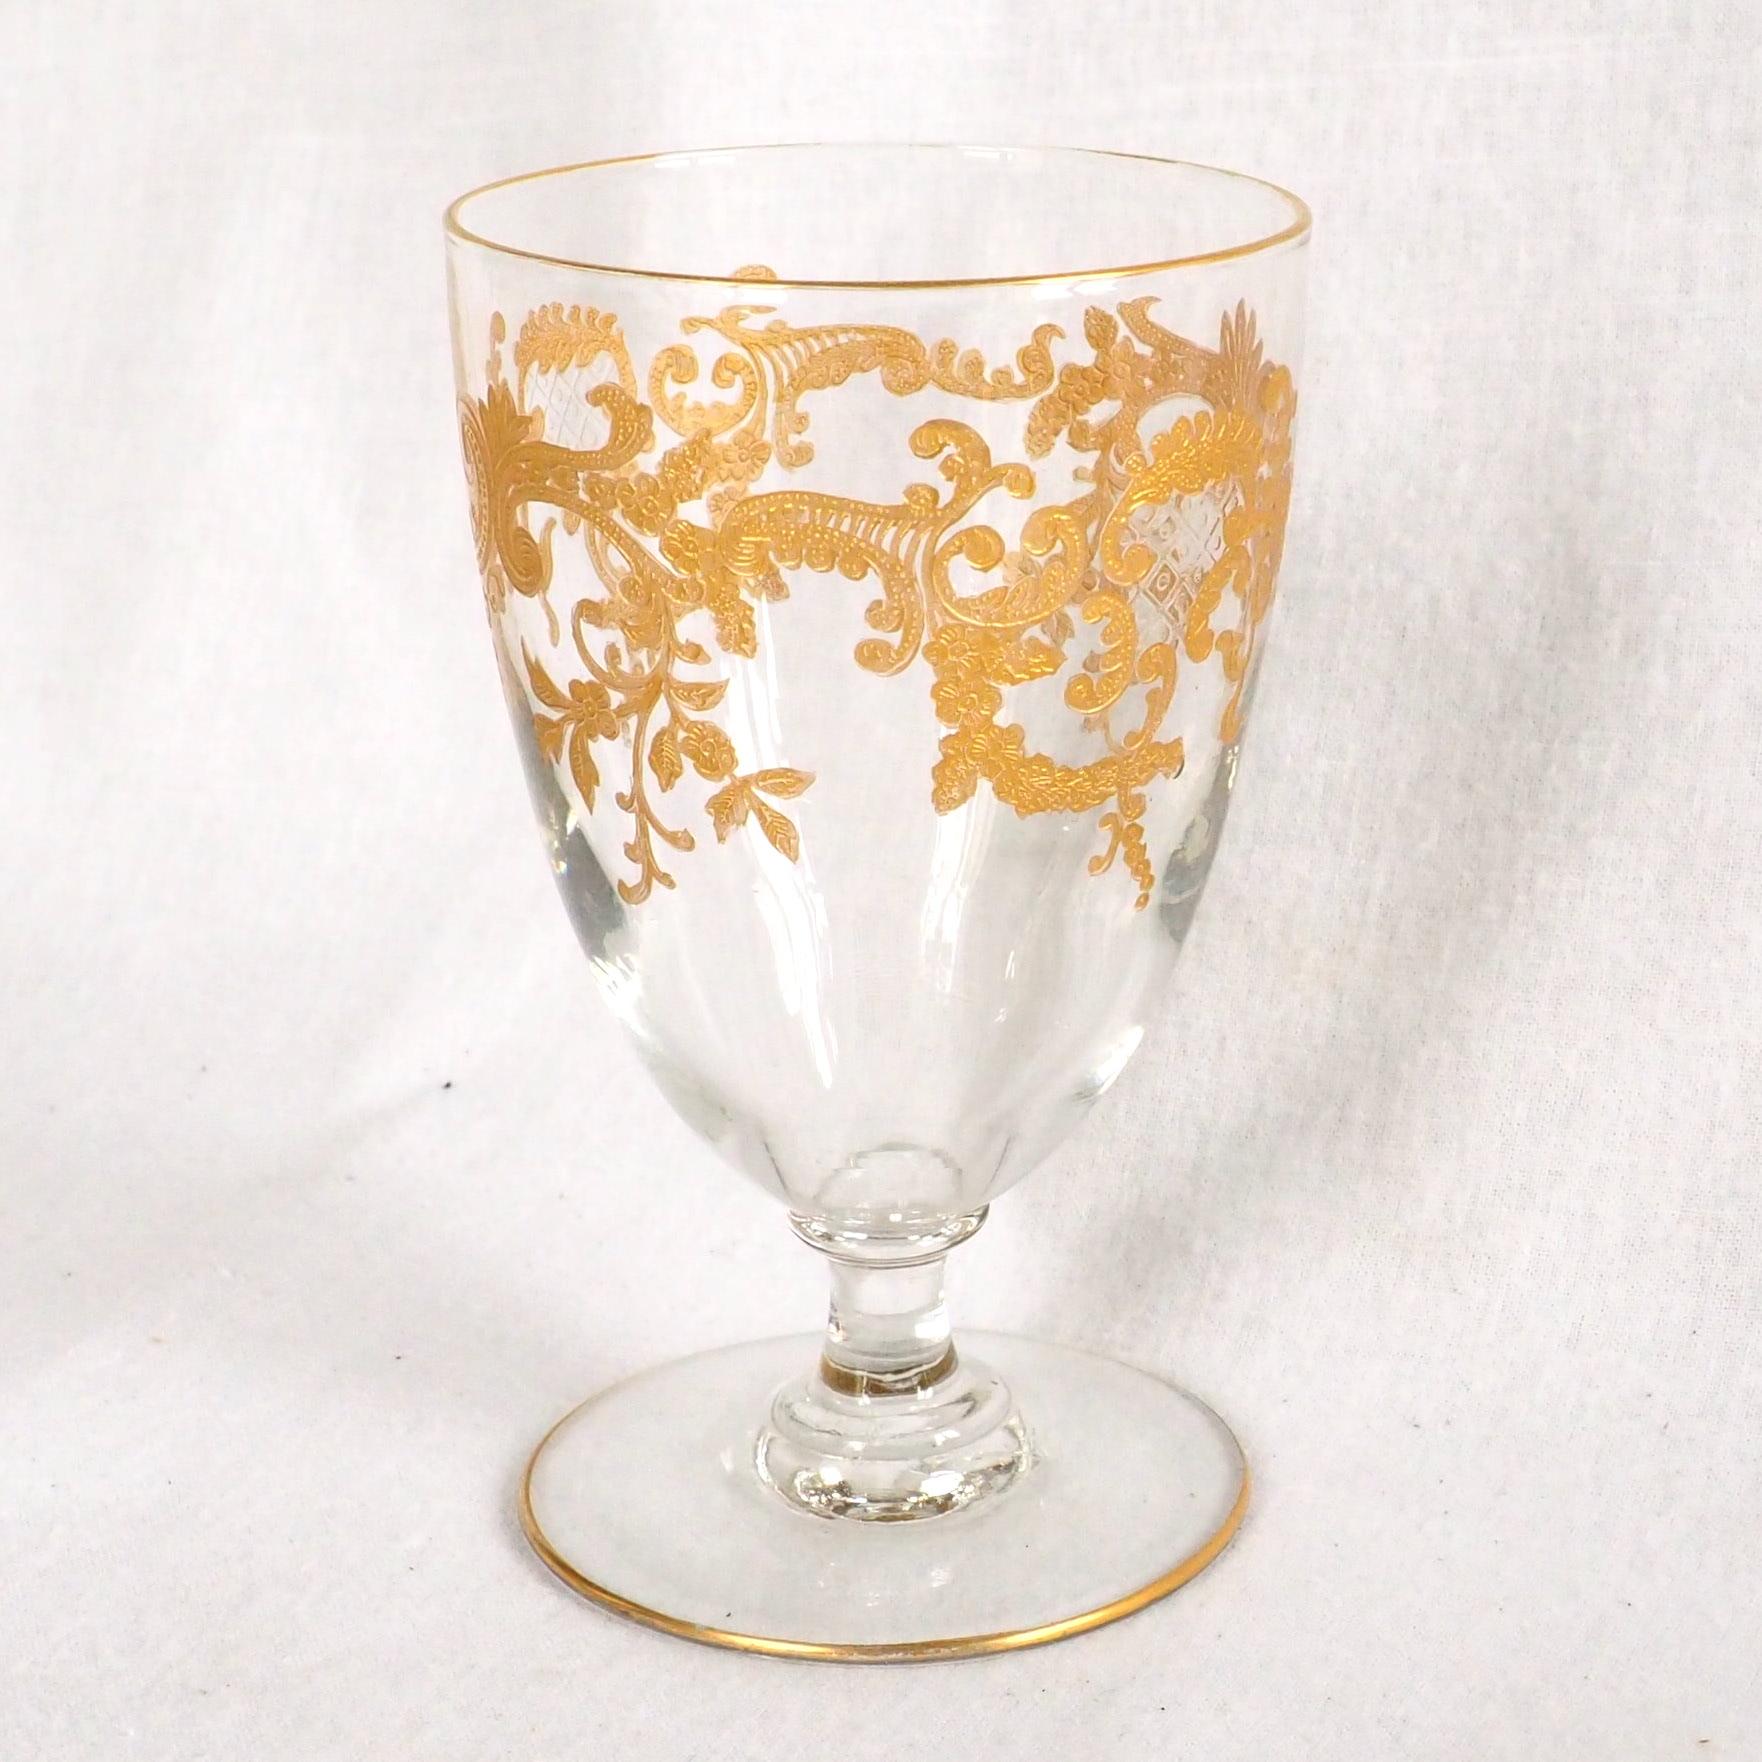 Baccarat crystal water glass or goblet, sophisticated engraved Louis XV Rococo style pattern enhanced with fine gold, edges also gilt. Late 19th century, circa 1890 - French Art Nouveau production period.
The glass is quite tall : it also makes a